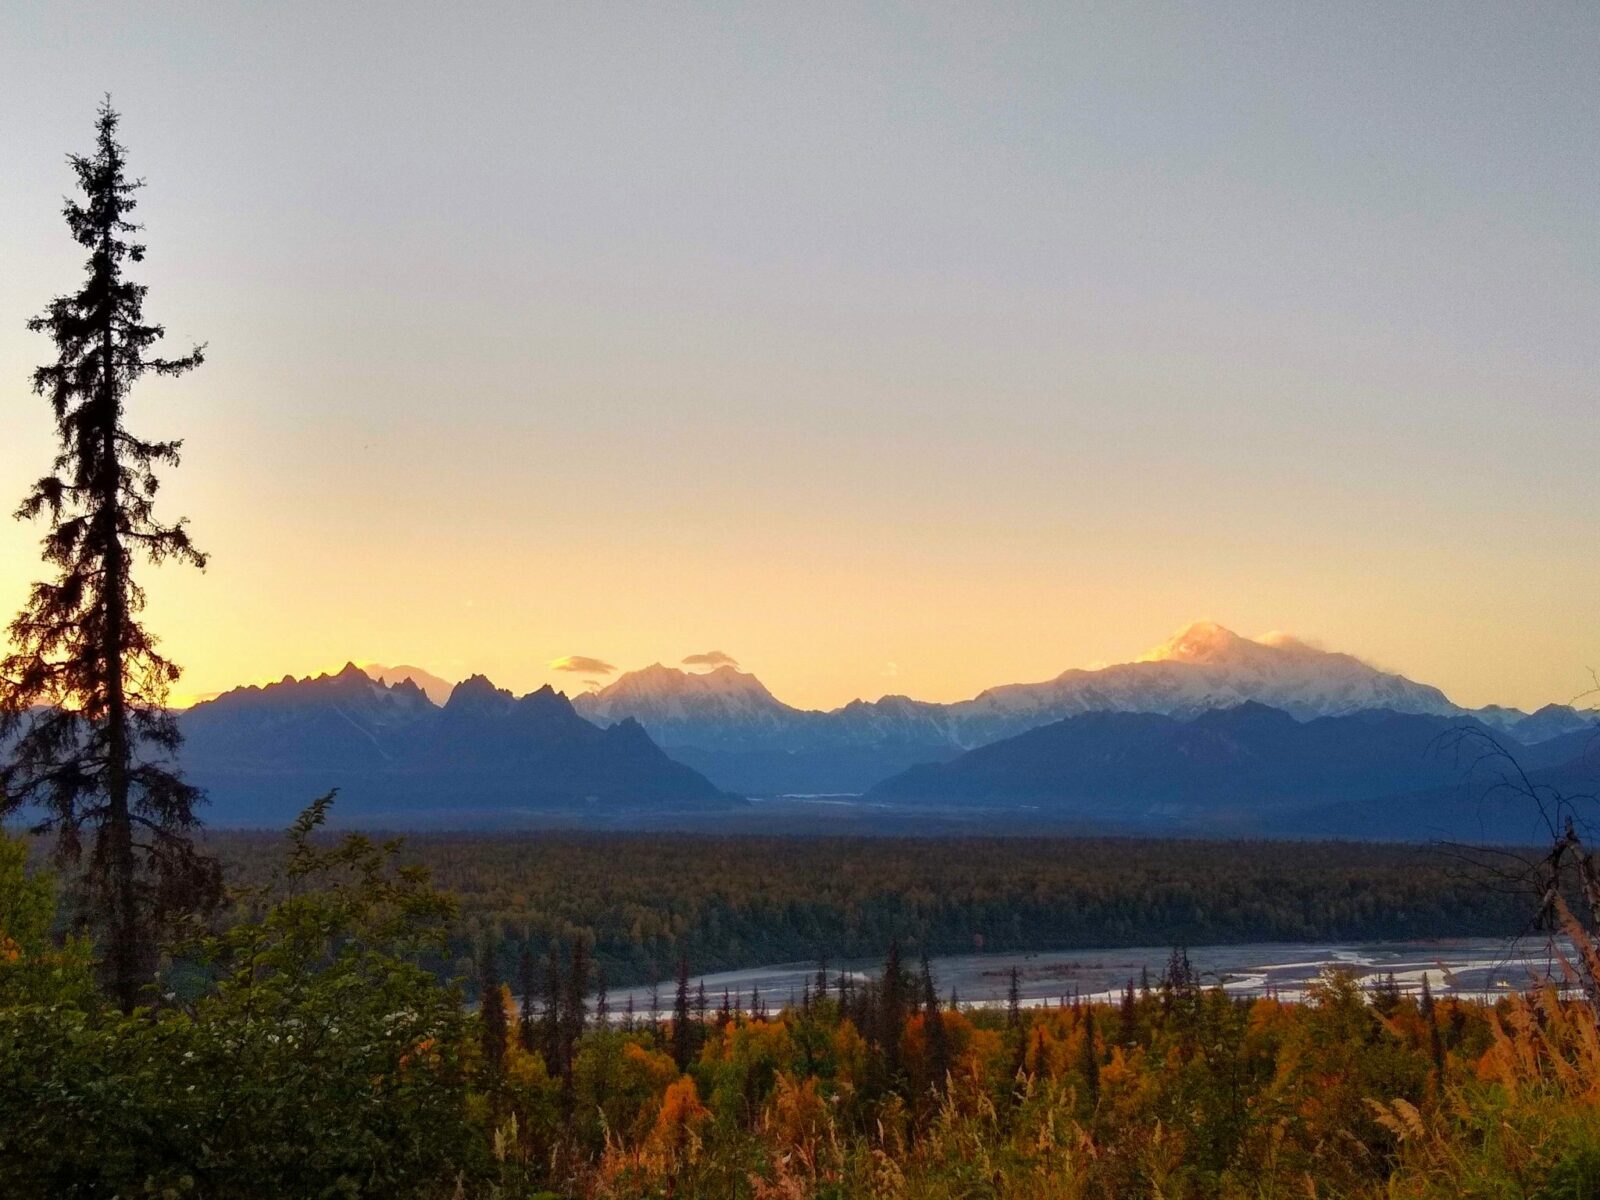 camping in alaska at denali state park with views of denali and other mountains of the alaska range at sunset. The Susitna river is in the distance and evergreen trees and orange fall shrubs are in the foreground